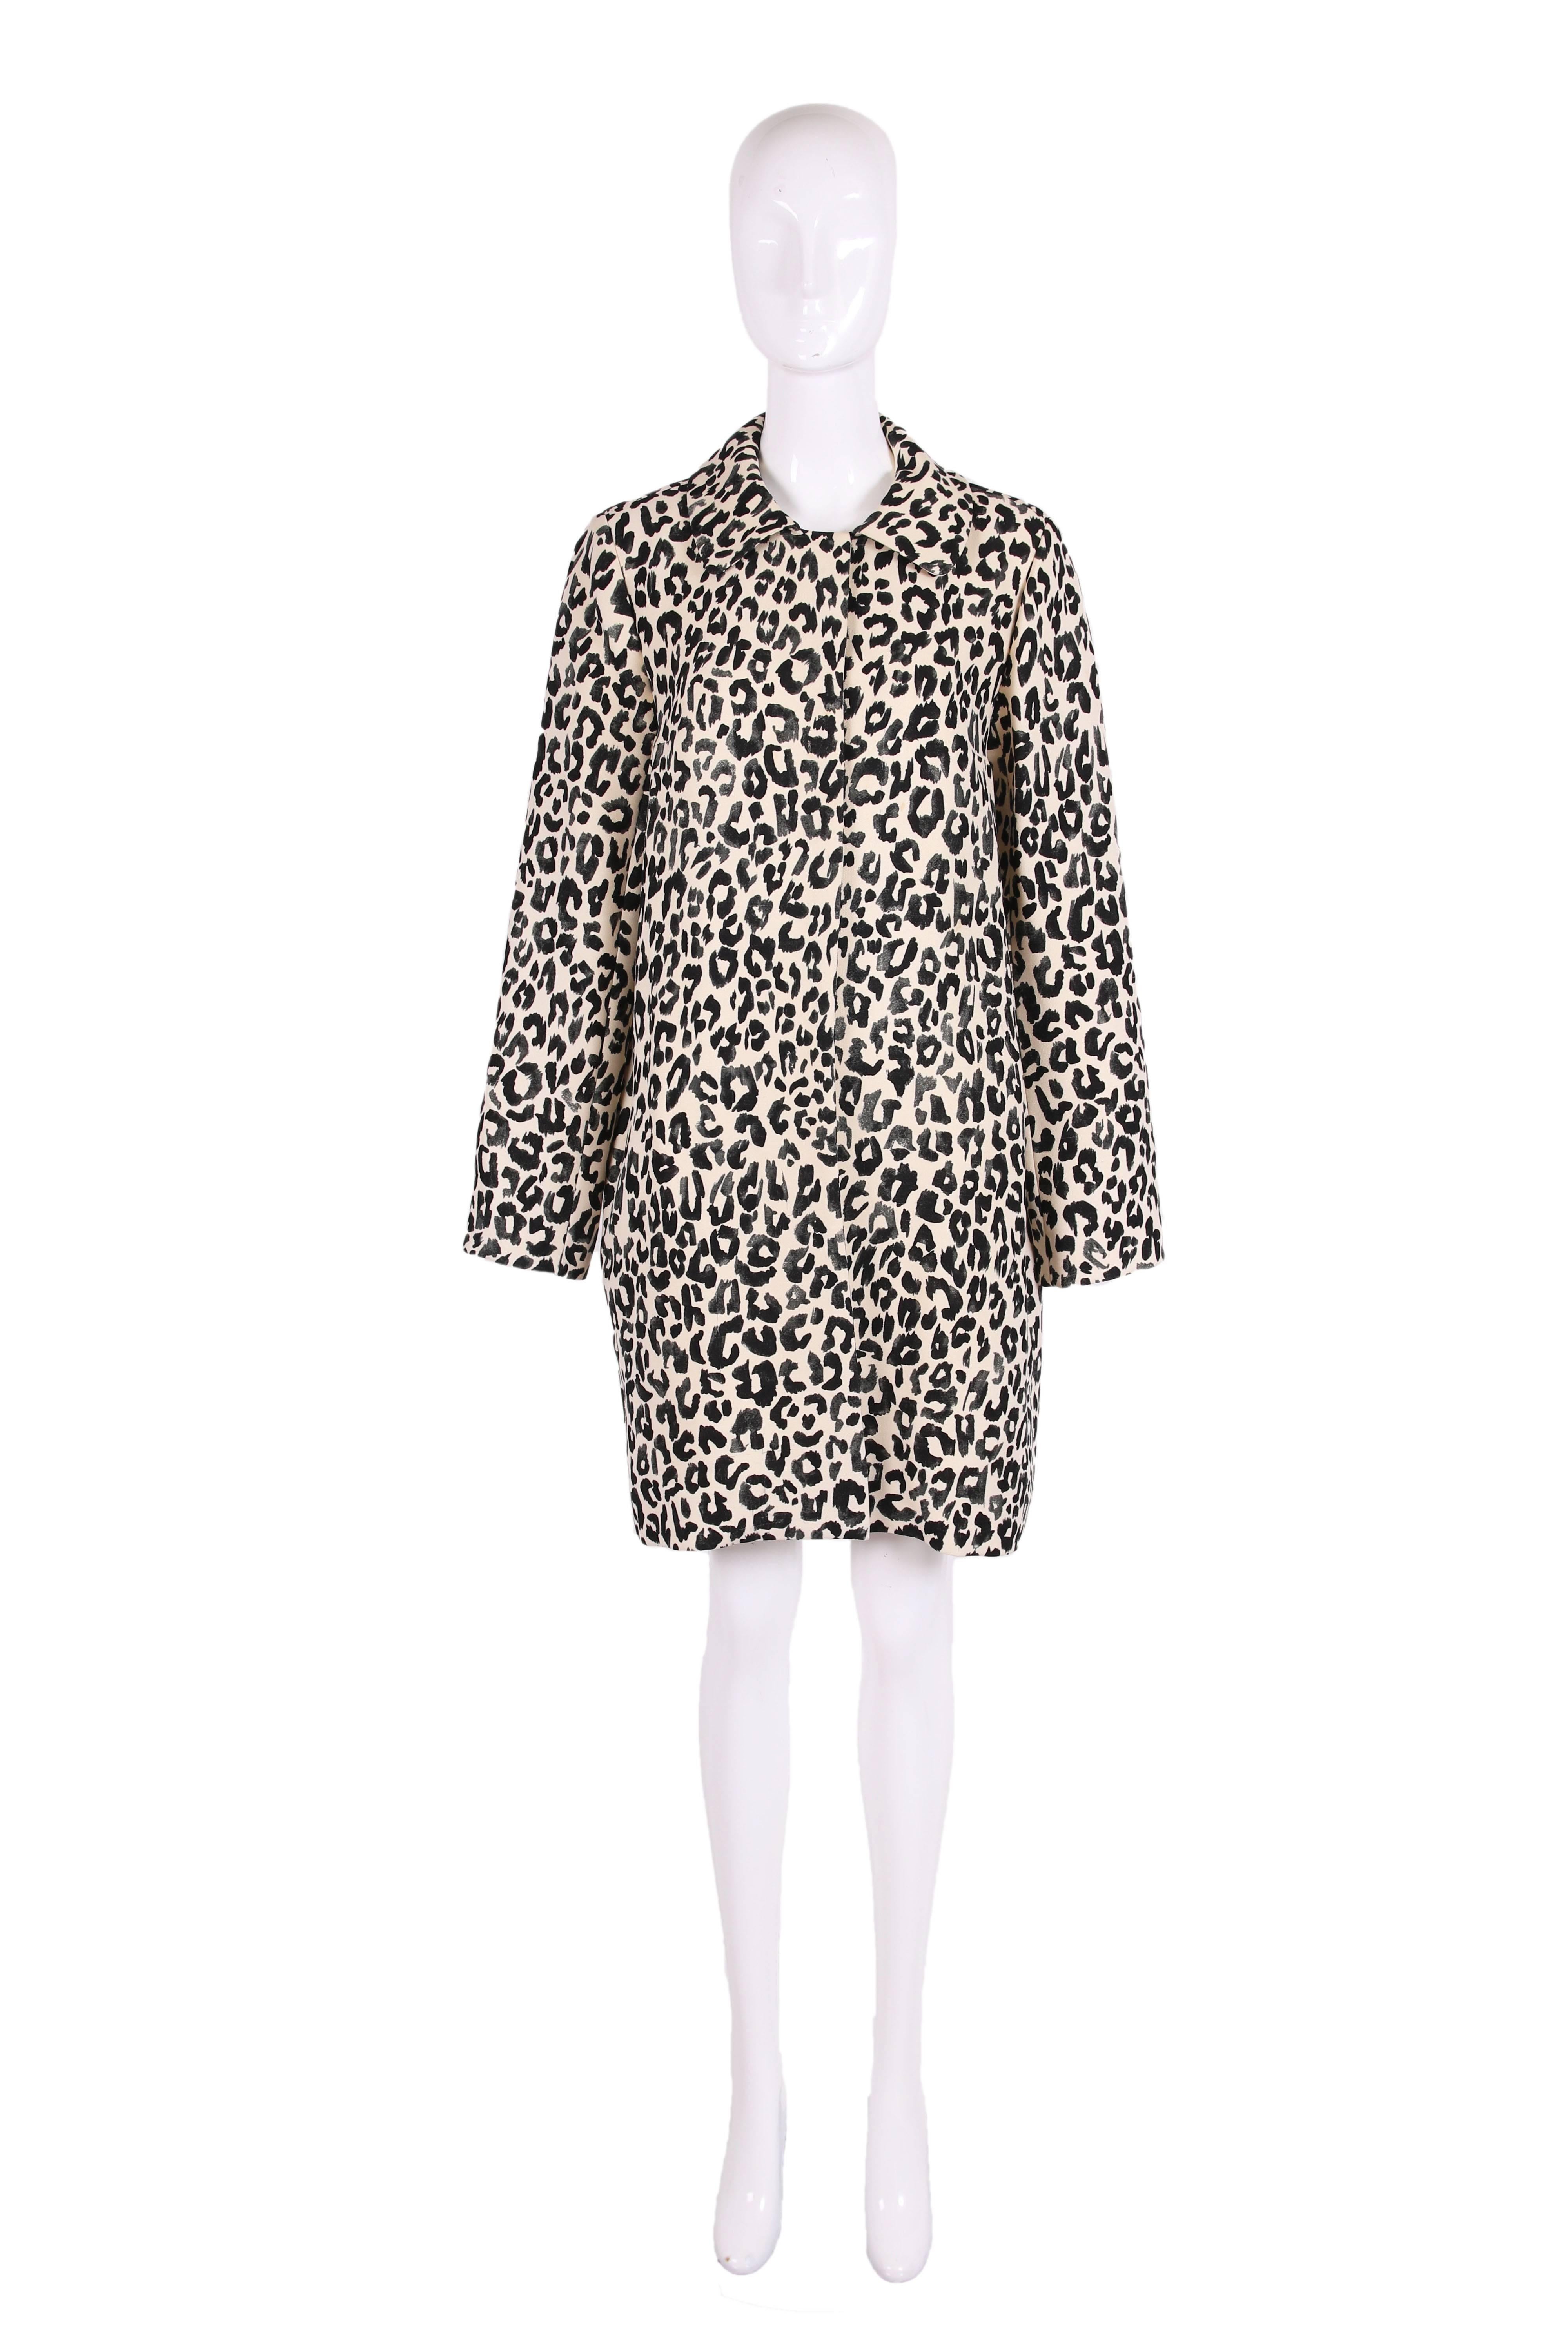 1998 Chloe by Stella McCartney wool and silk blend leopard print coat. In excellent condition - size tag 42.
MEASUREMENTS:
Bust - 42